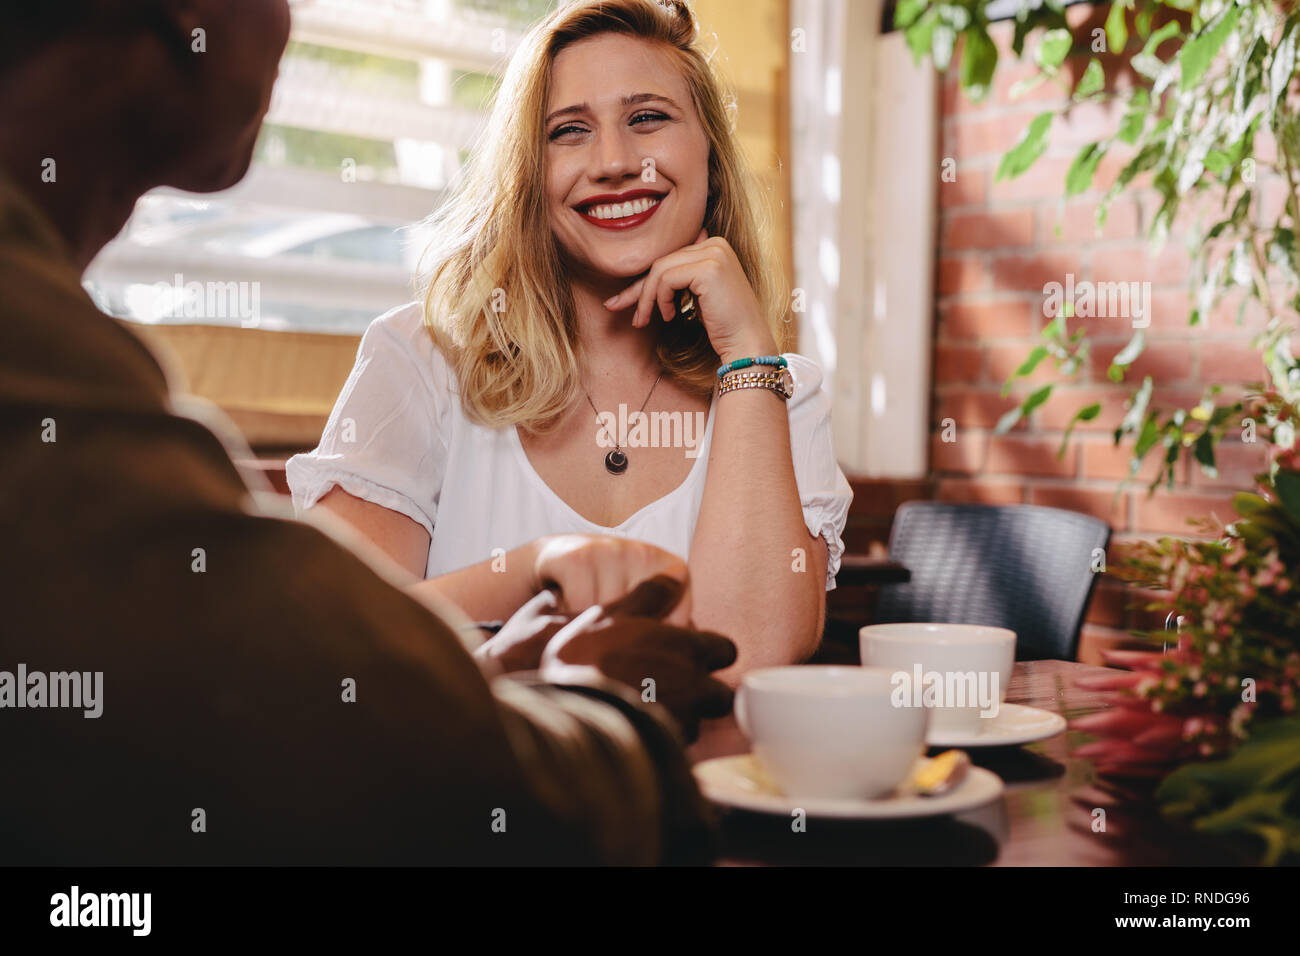 Smiling woman sitting at cafe table holding hand of her boyfriend. Dating couple spending quality time at coffee shop. Stock Photo